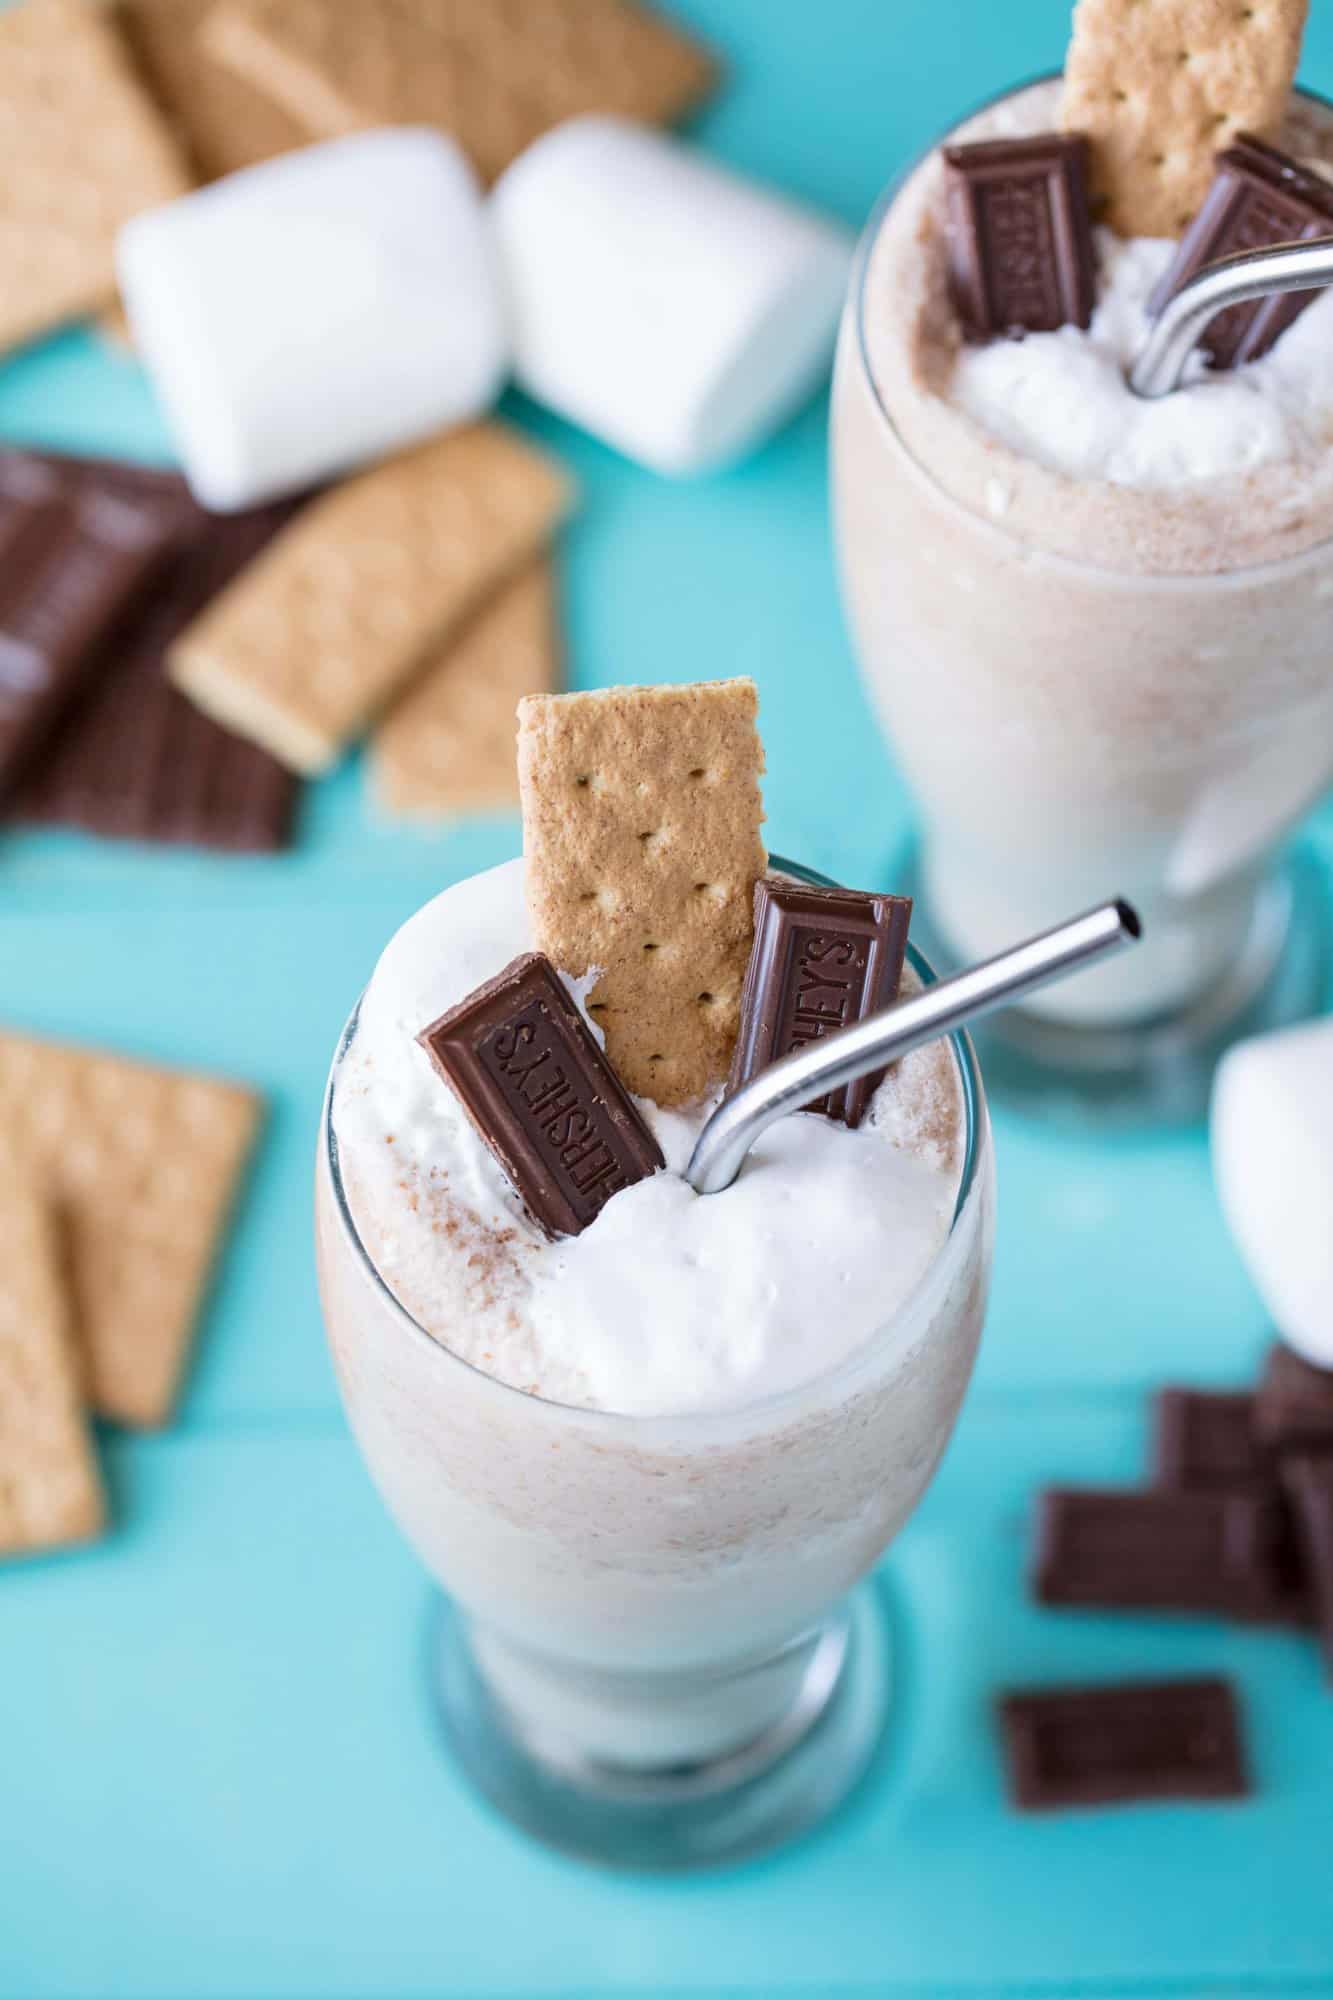 S'mores Frappes are all the delicious flavors of s'mores that you love packed into one delicious ice cold beverage treat. No campfire needed!